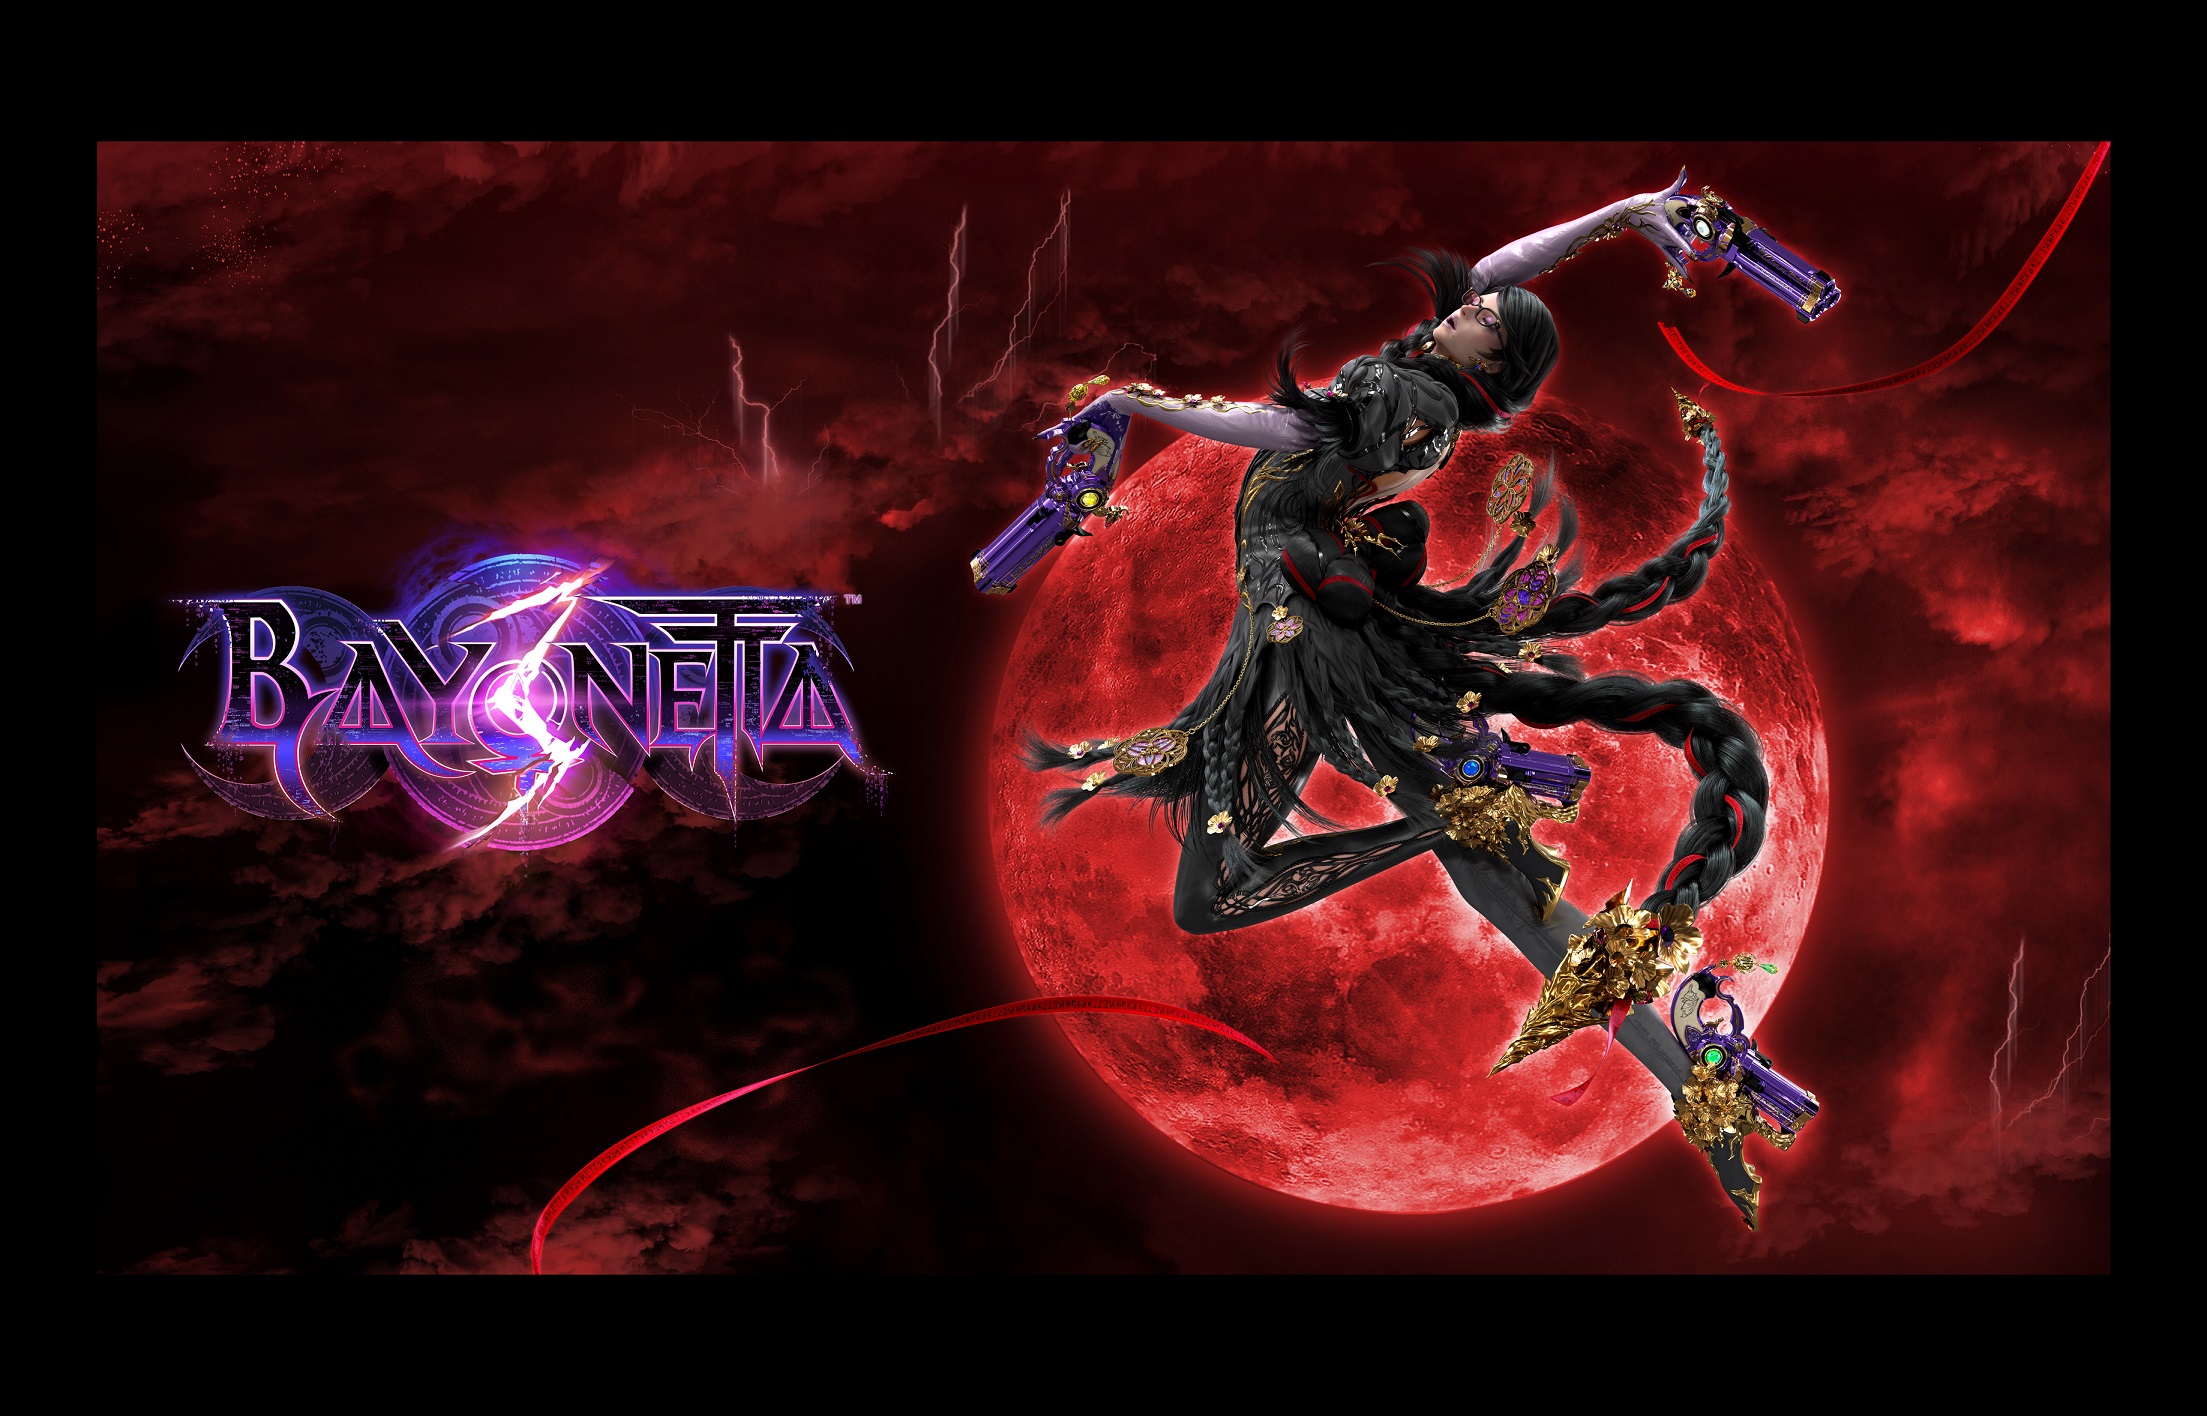 Bayonetta 3 conjures up a release date in October, reveals mode that adds clothing